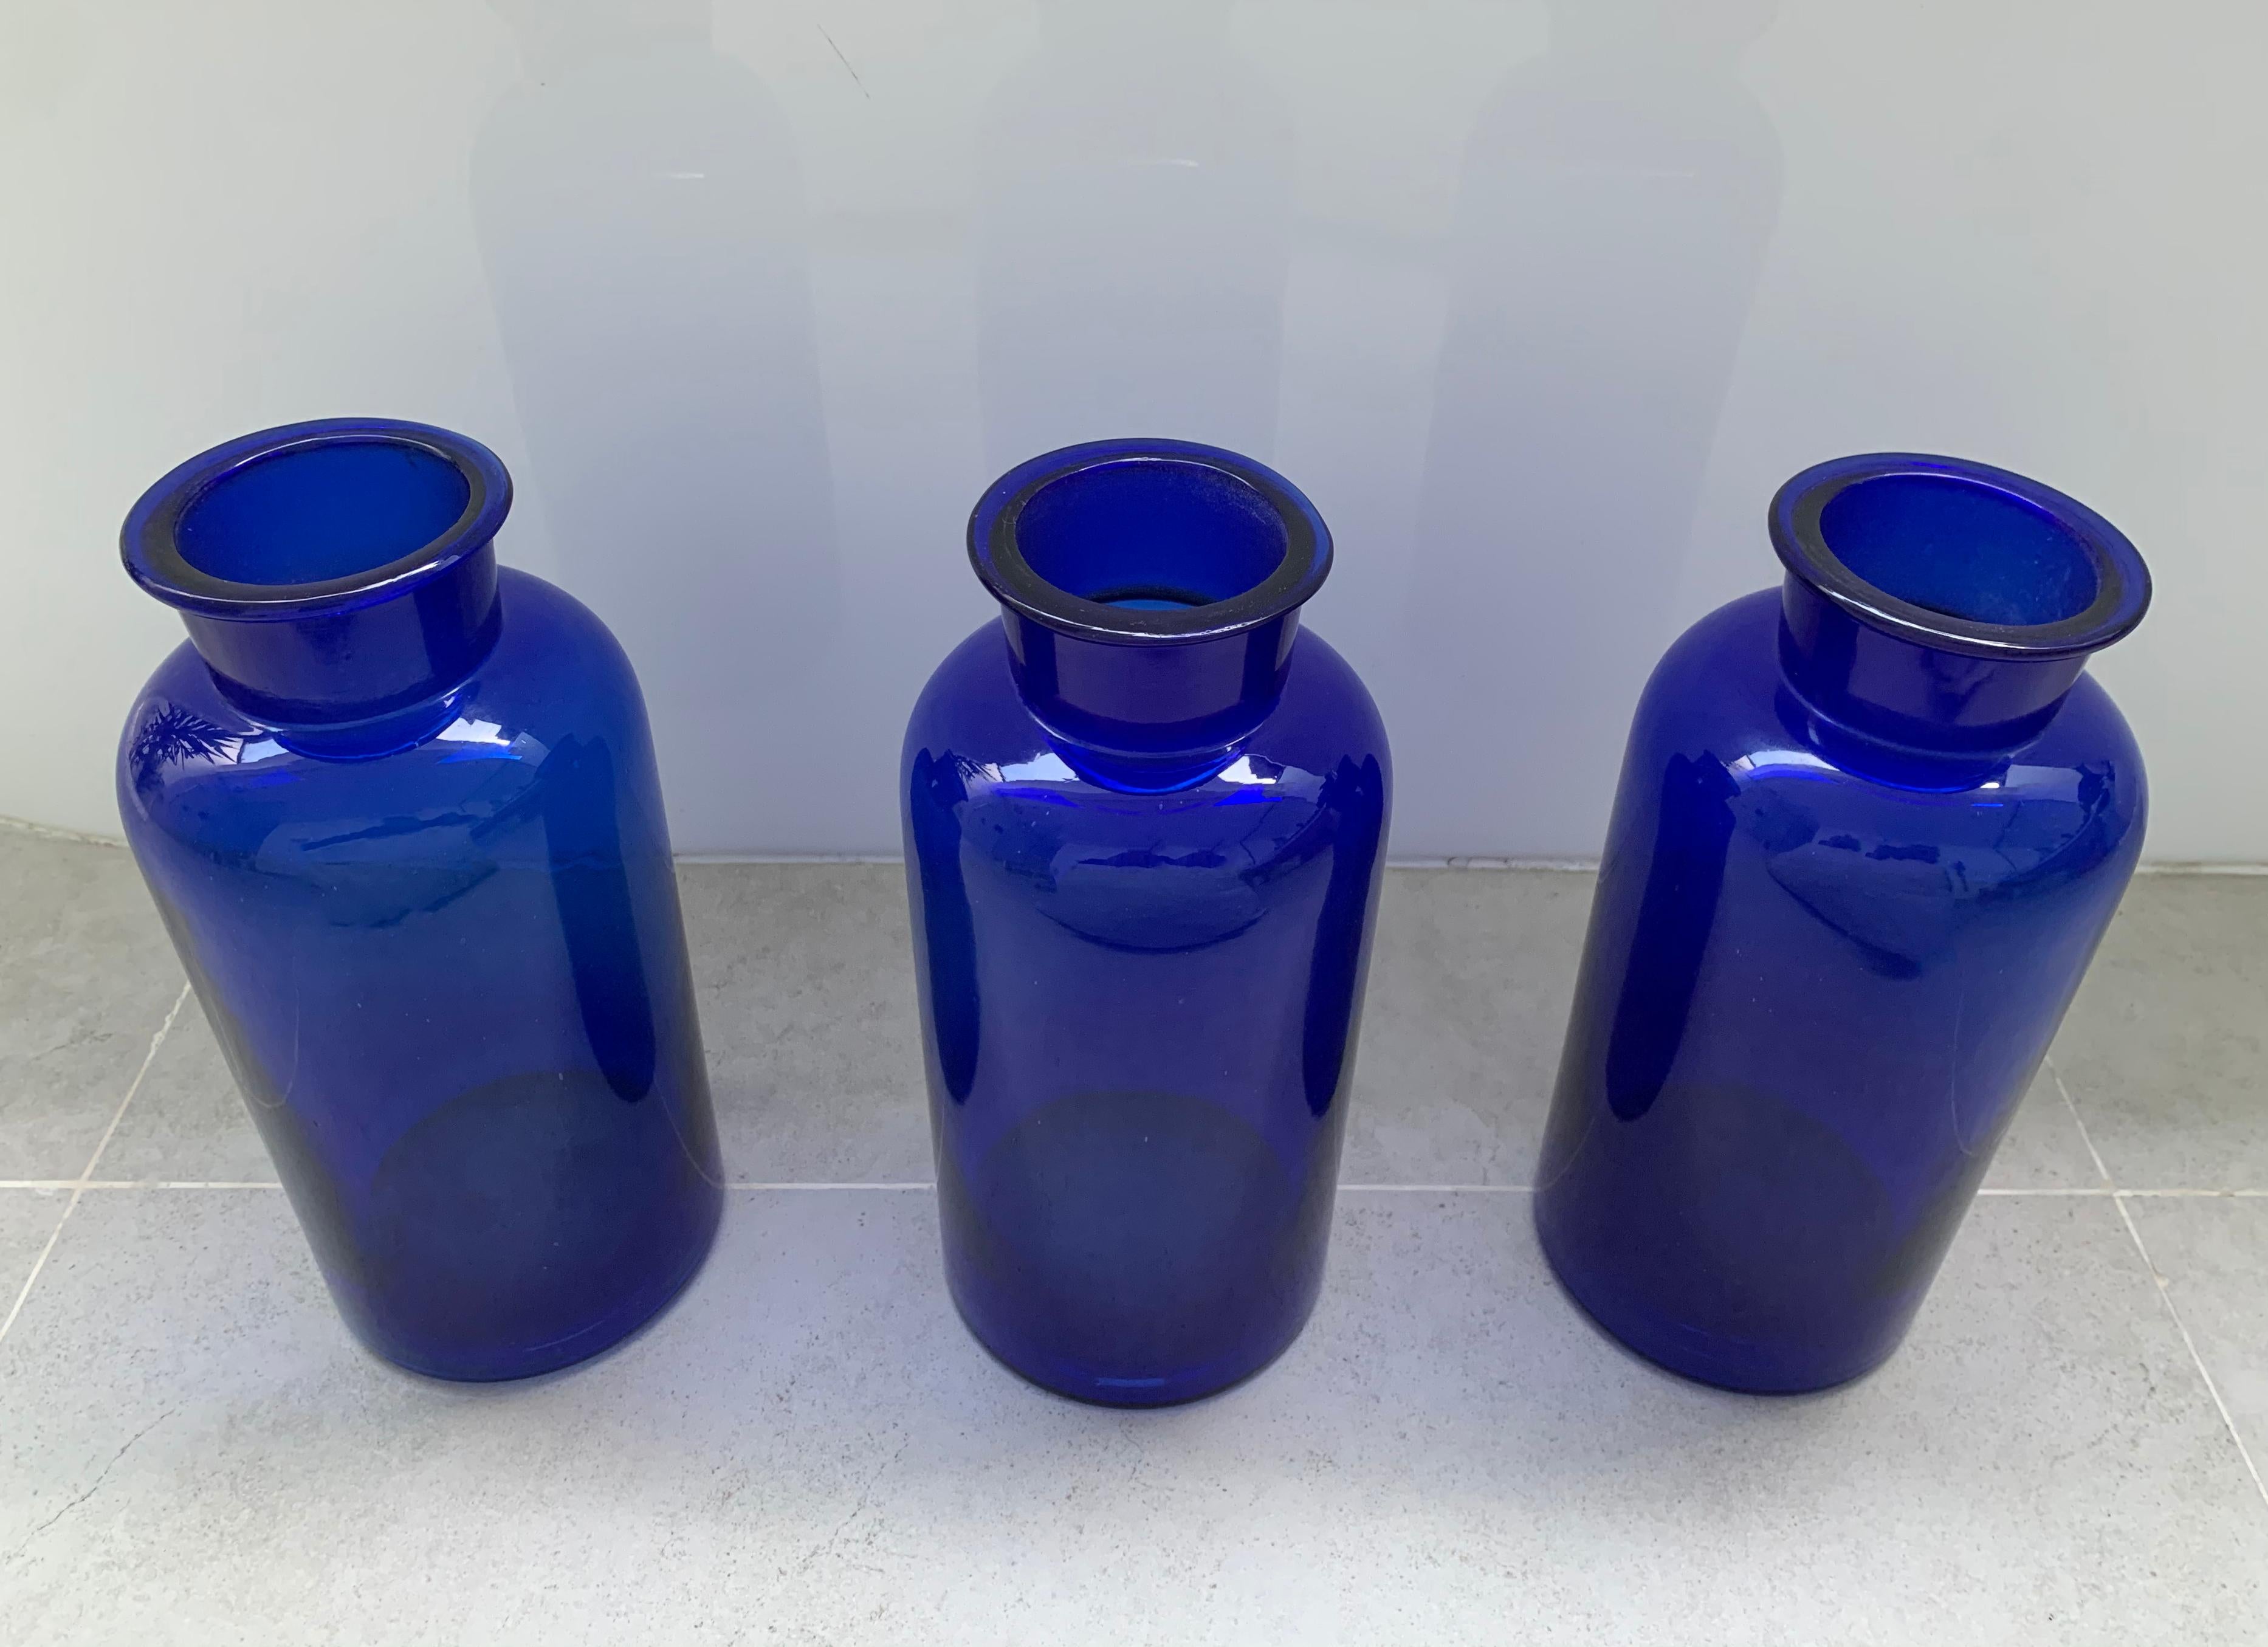 A set of vintage Dutch Cobalt blue pharmacy bottles from the early 20th century. The cobalt blue glass served as a protector of the bottles contents from sunlight. These bottles were used by pharmacies to store bulk quantities of medicinal powders,